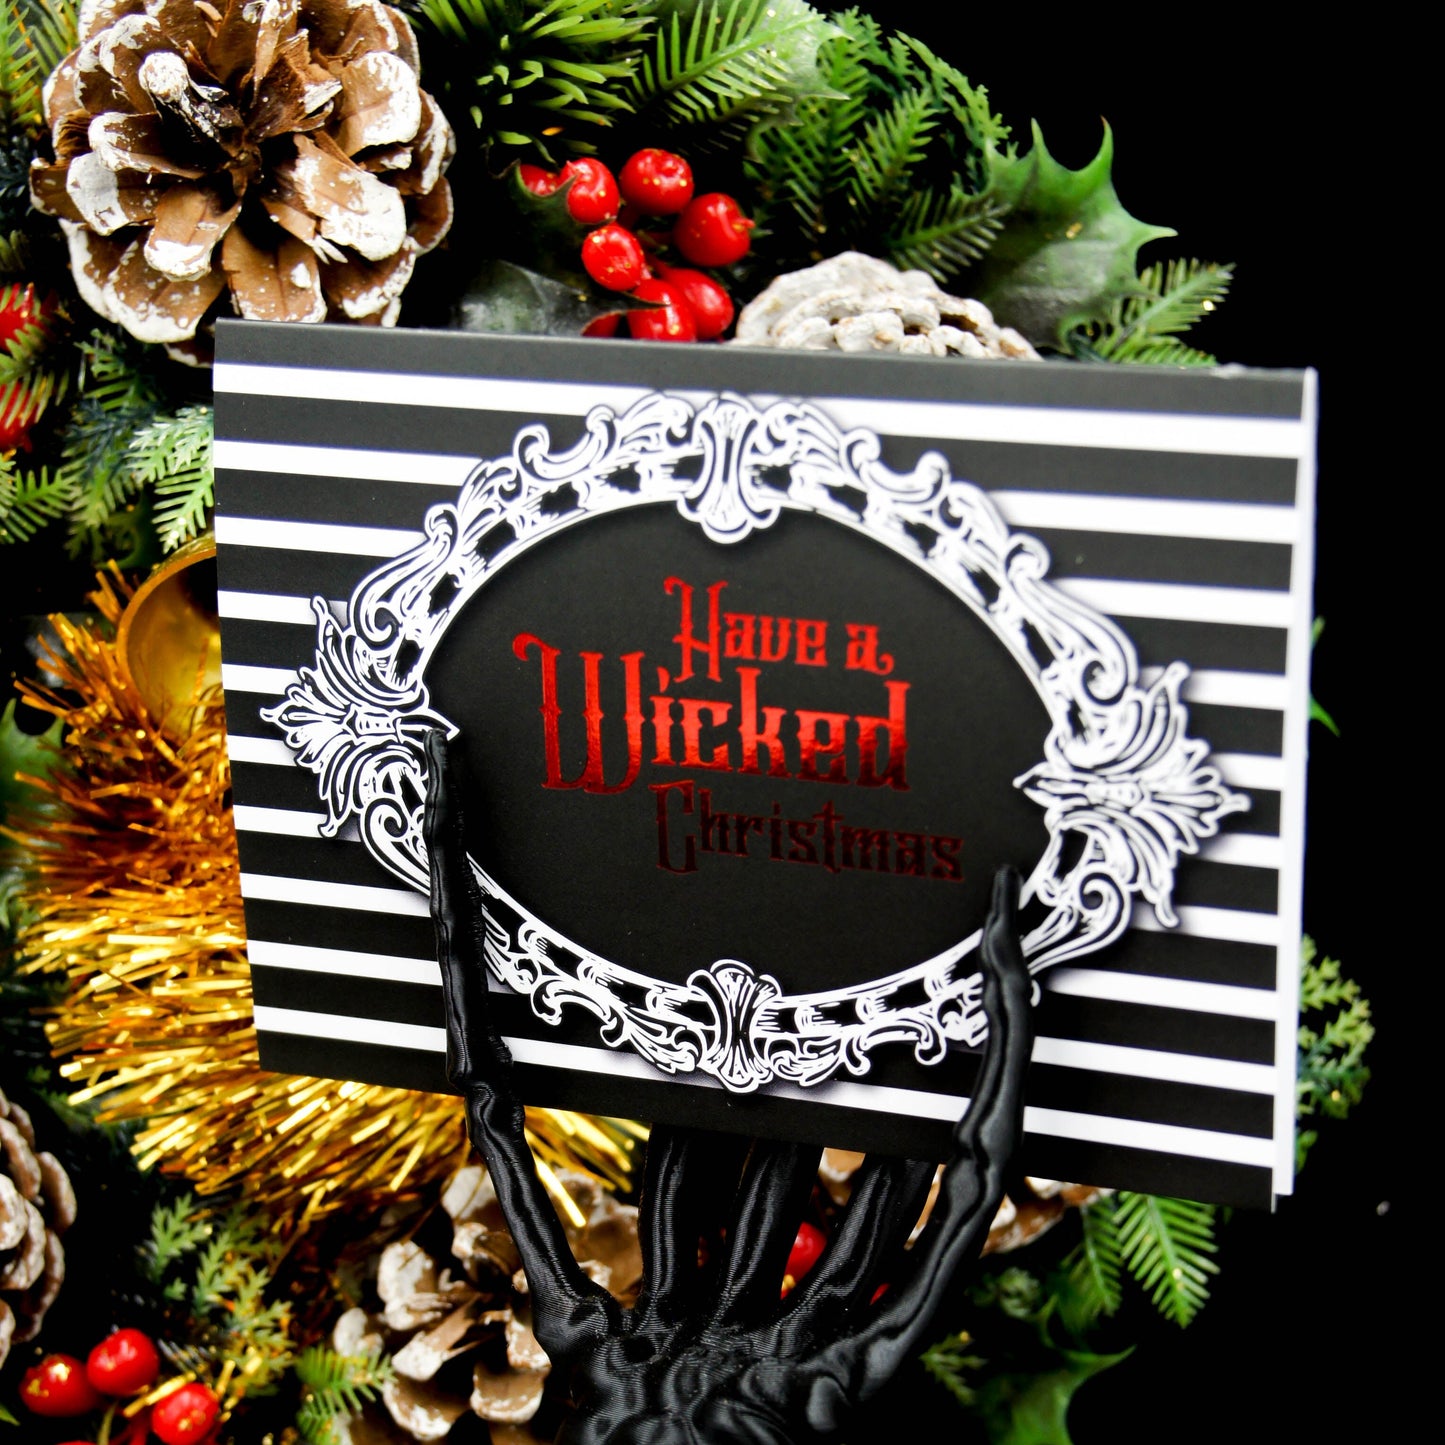 Have A Wicked Christmas Greetings Card | Gothic Christmas